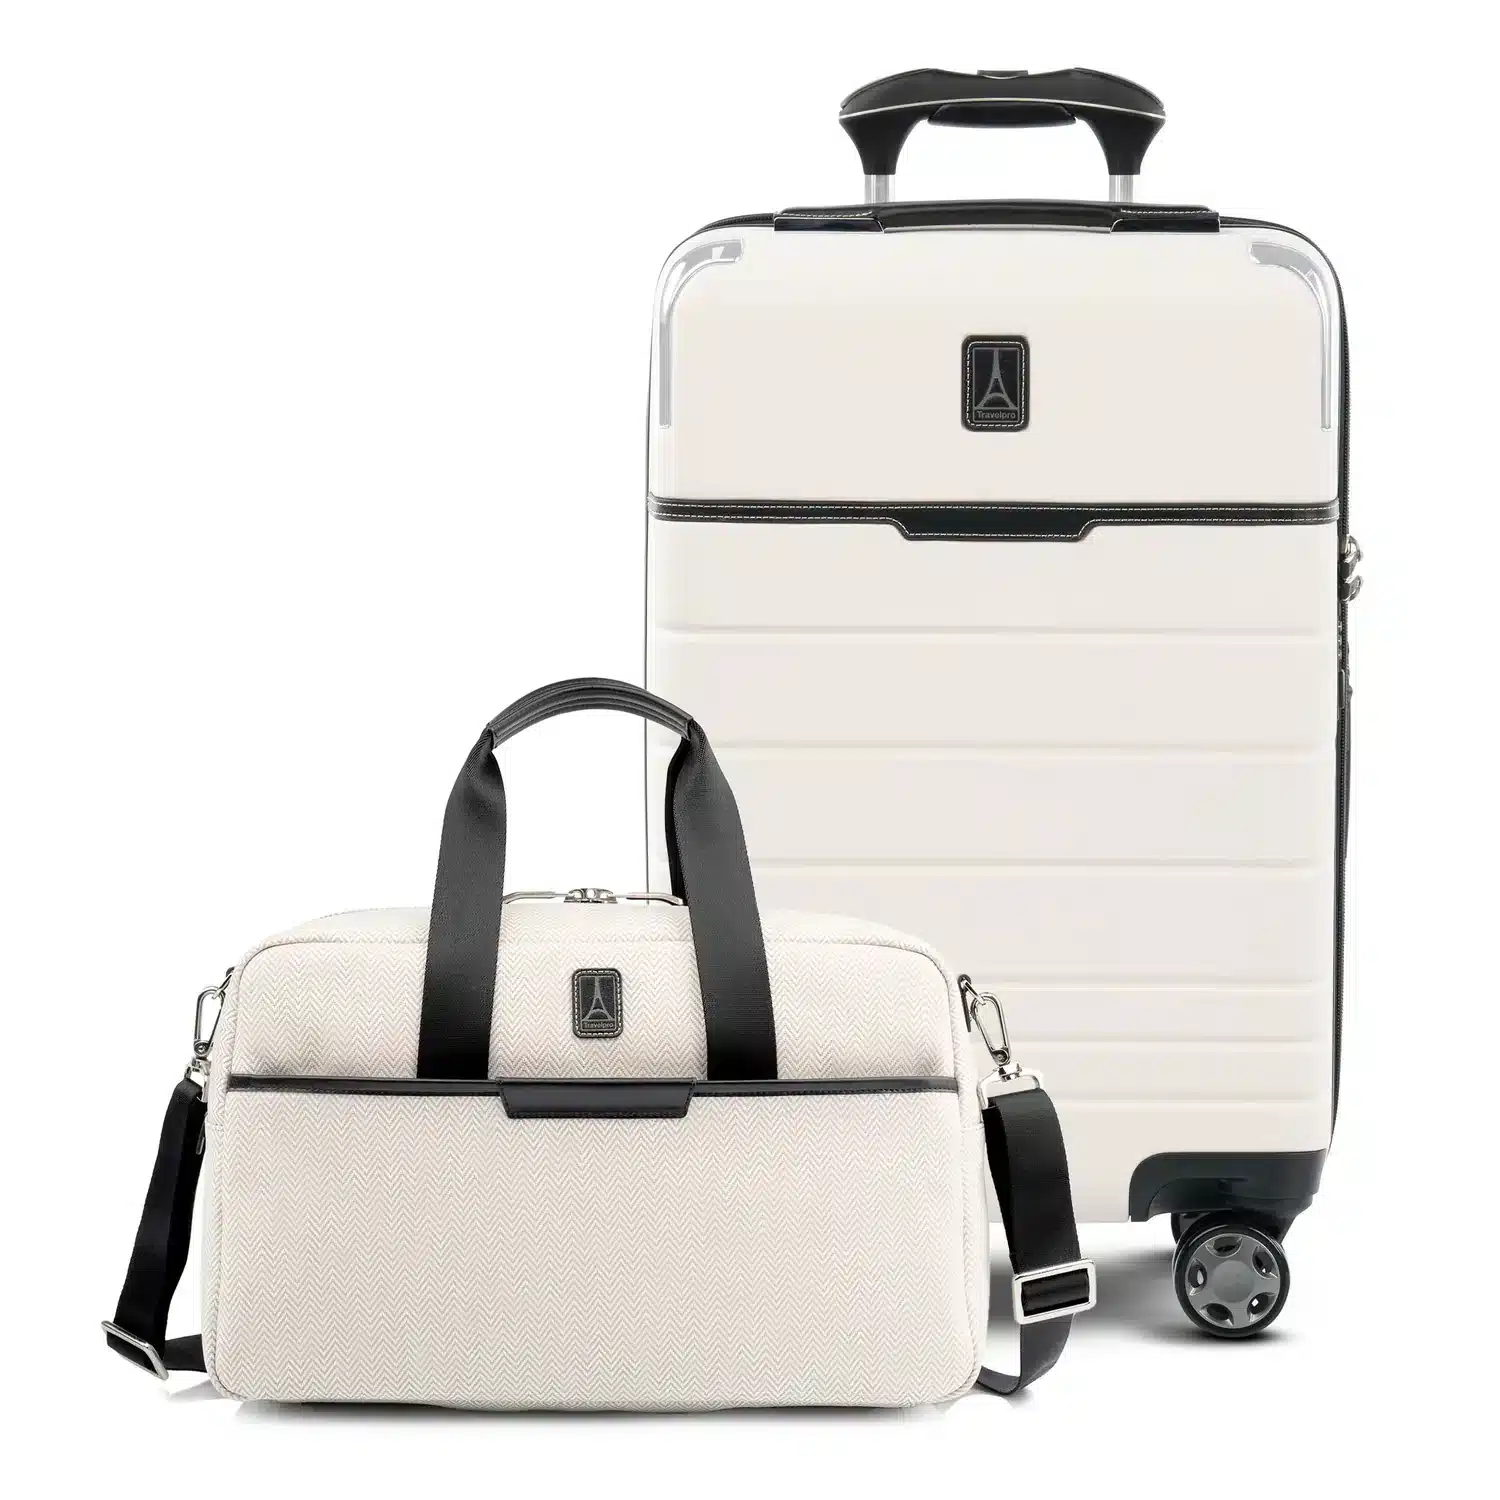 Travelpro® x Travel + Leisure® Carry-on Spinner and UnderSeat Tote Luggage Set